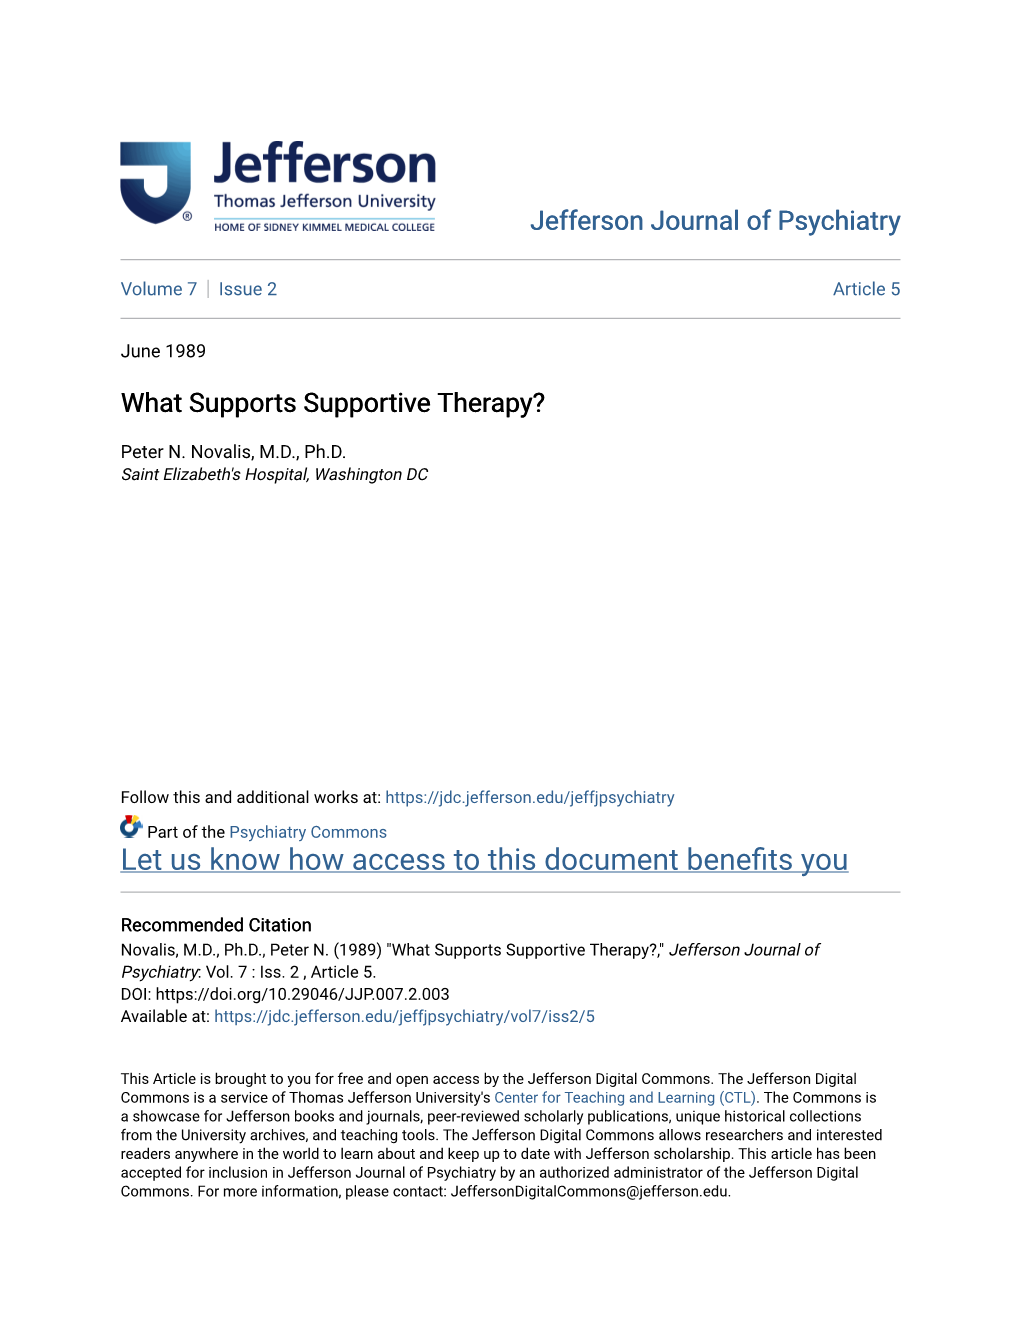 What Supports Supportive Therapy?